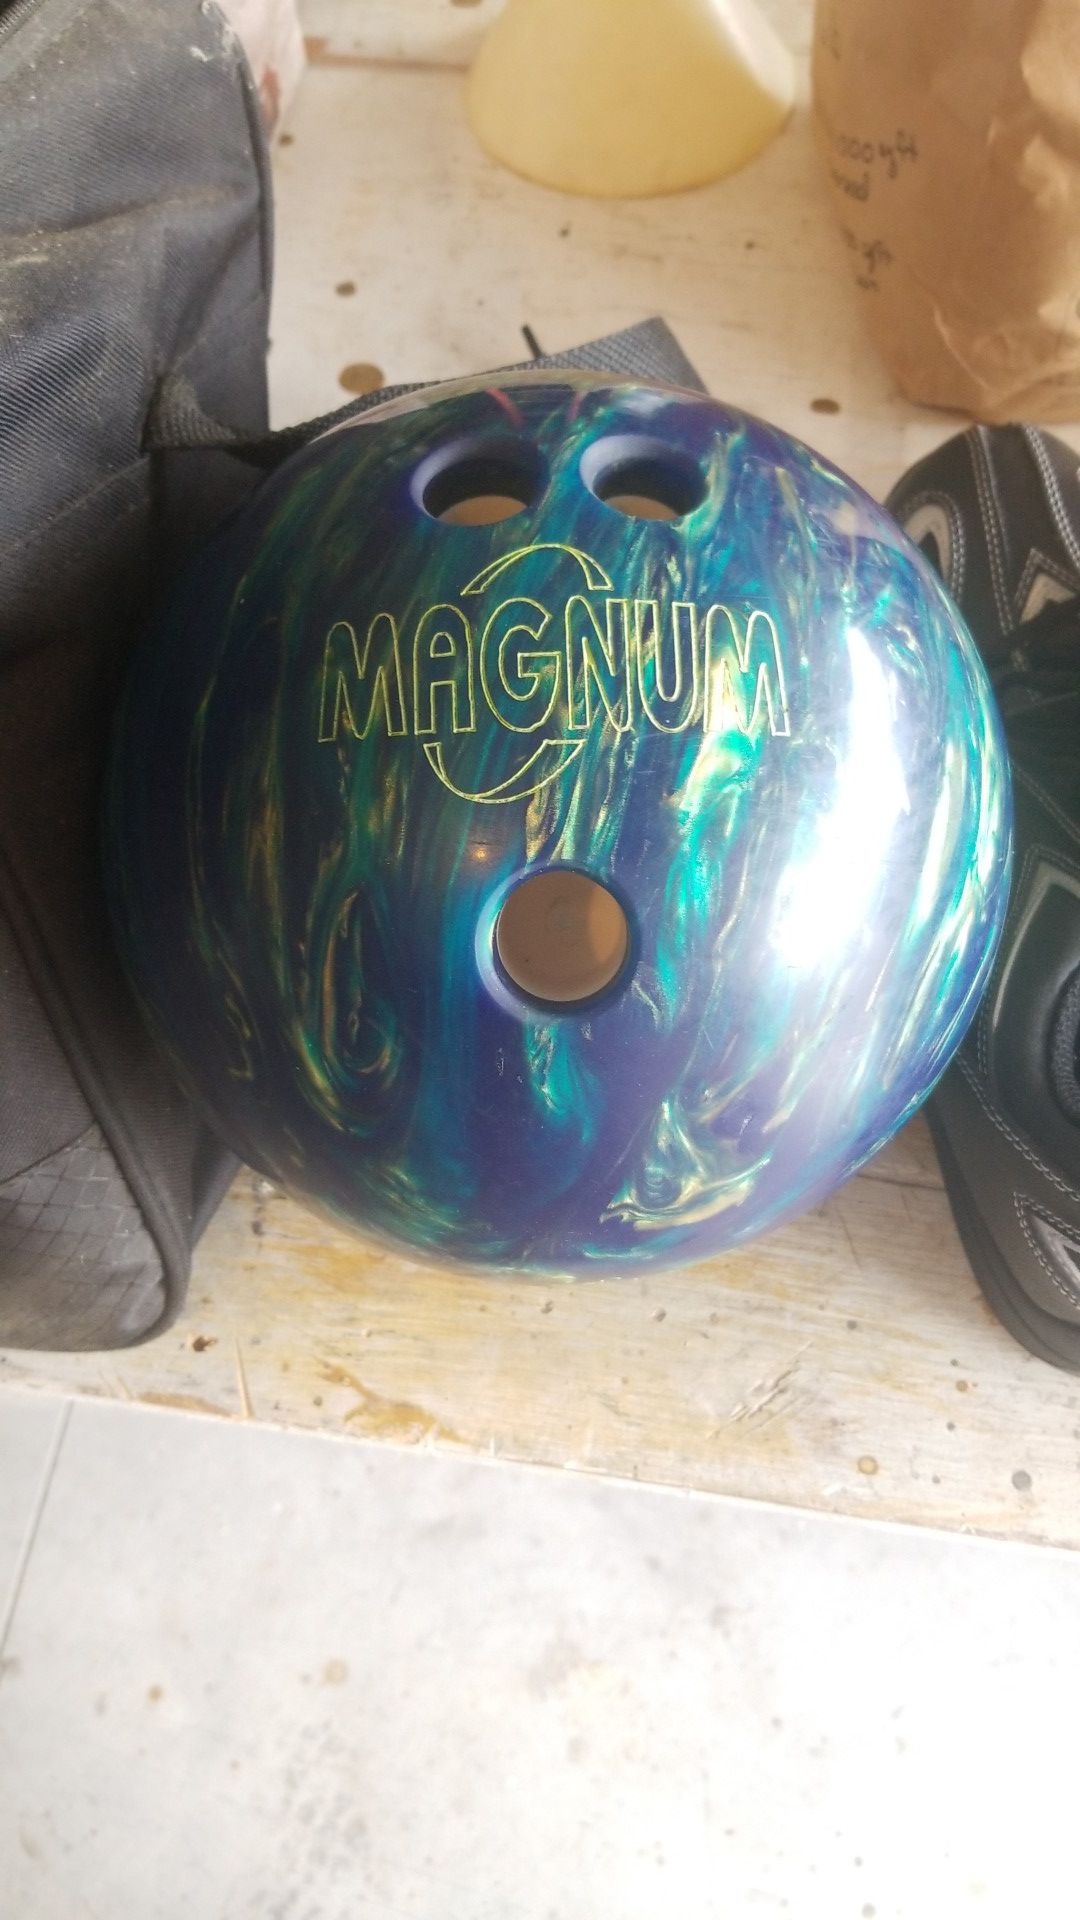 Magnum bowling ball with size 11 shoes and carrying bag